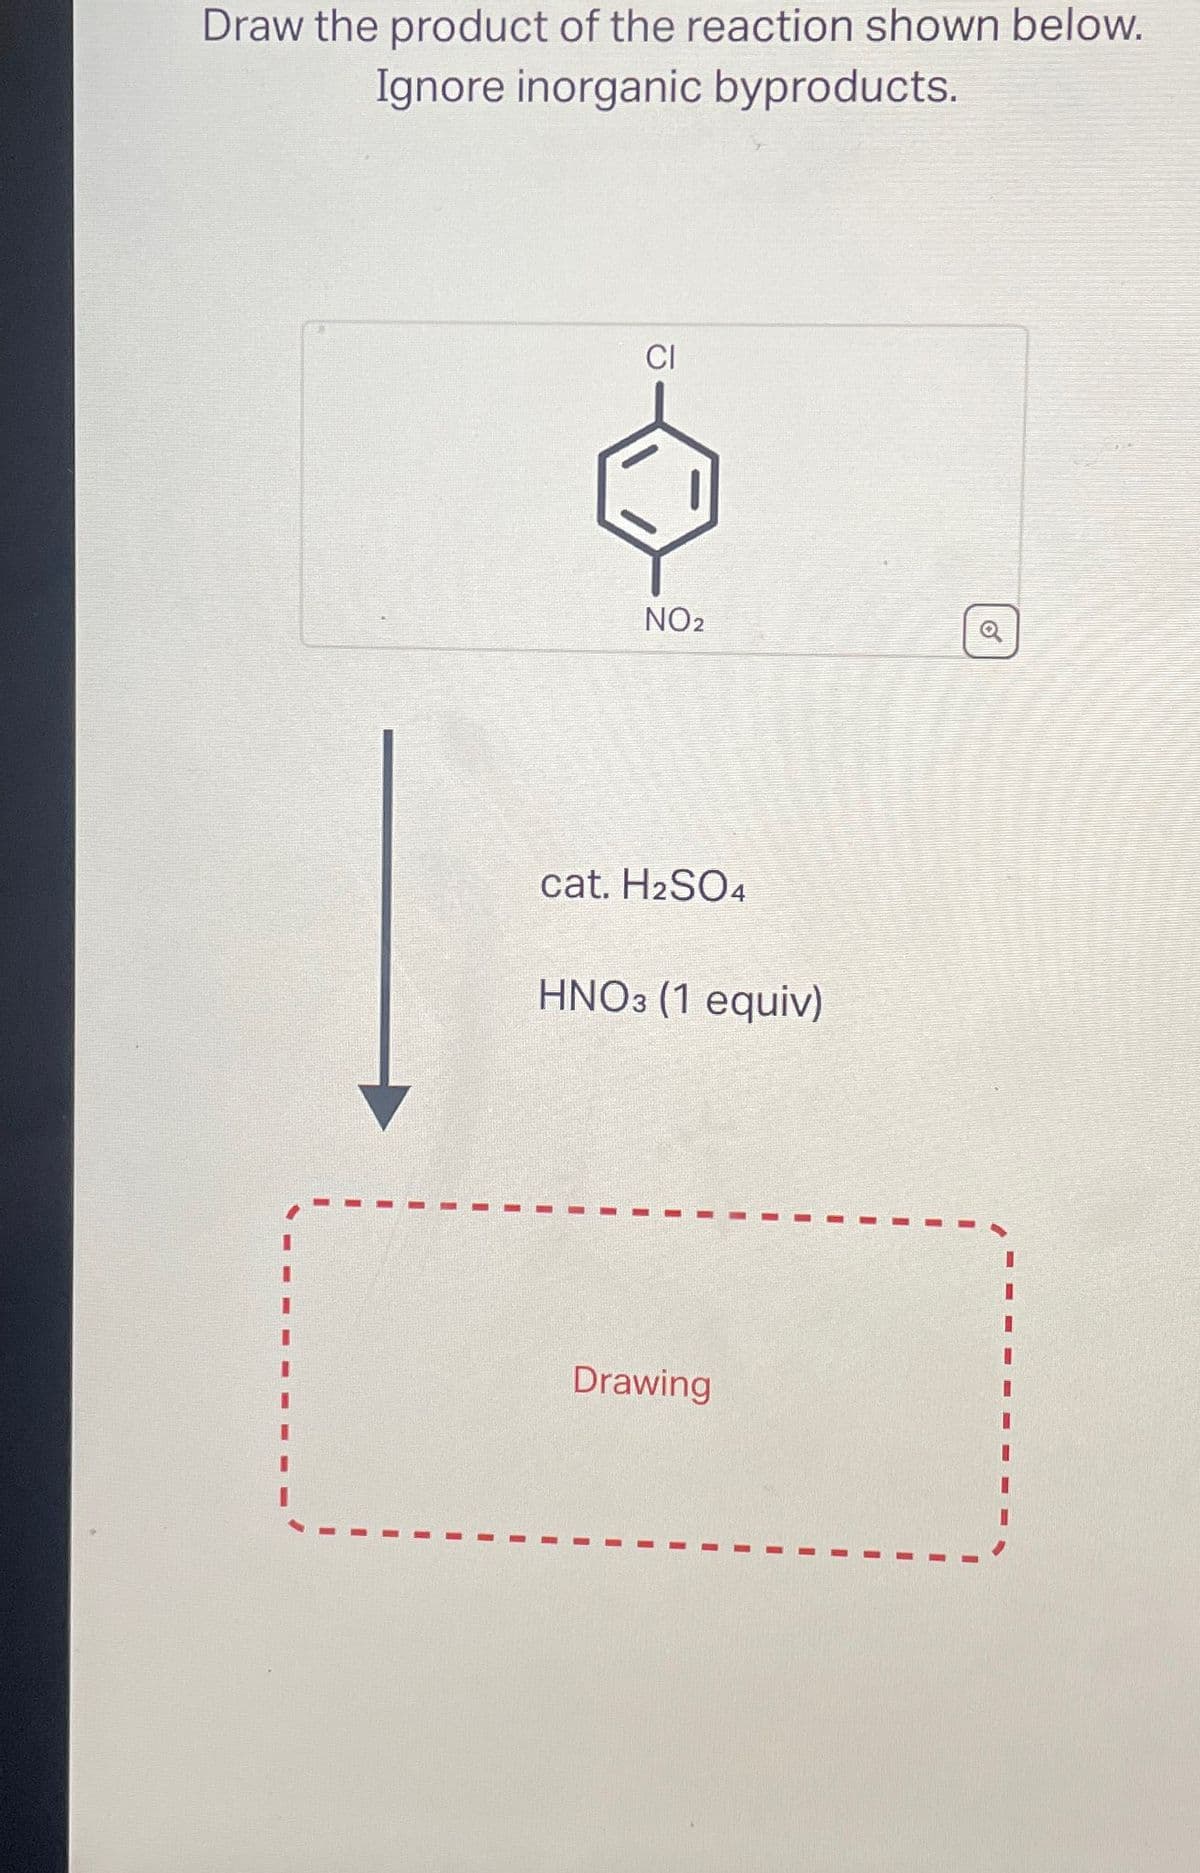 Draw the product of the reaction shown below.
Ignore inorganic byproducts.
CI
NO2
cat. H2SO4
HNO3 (1 equiv)
Drawing